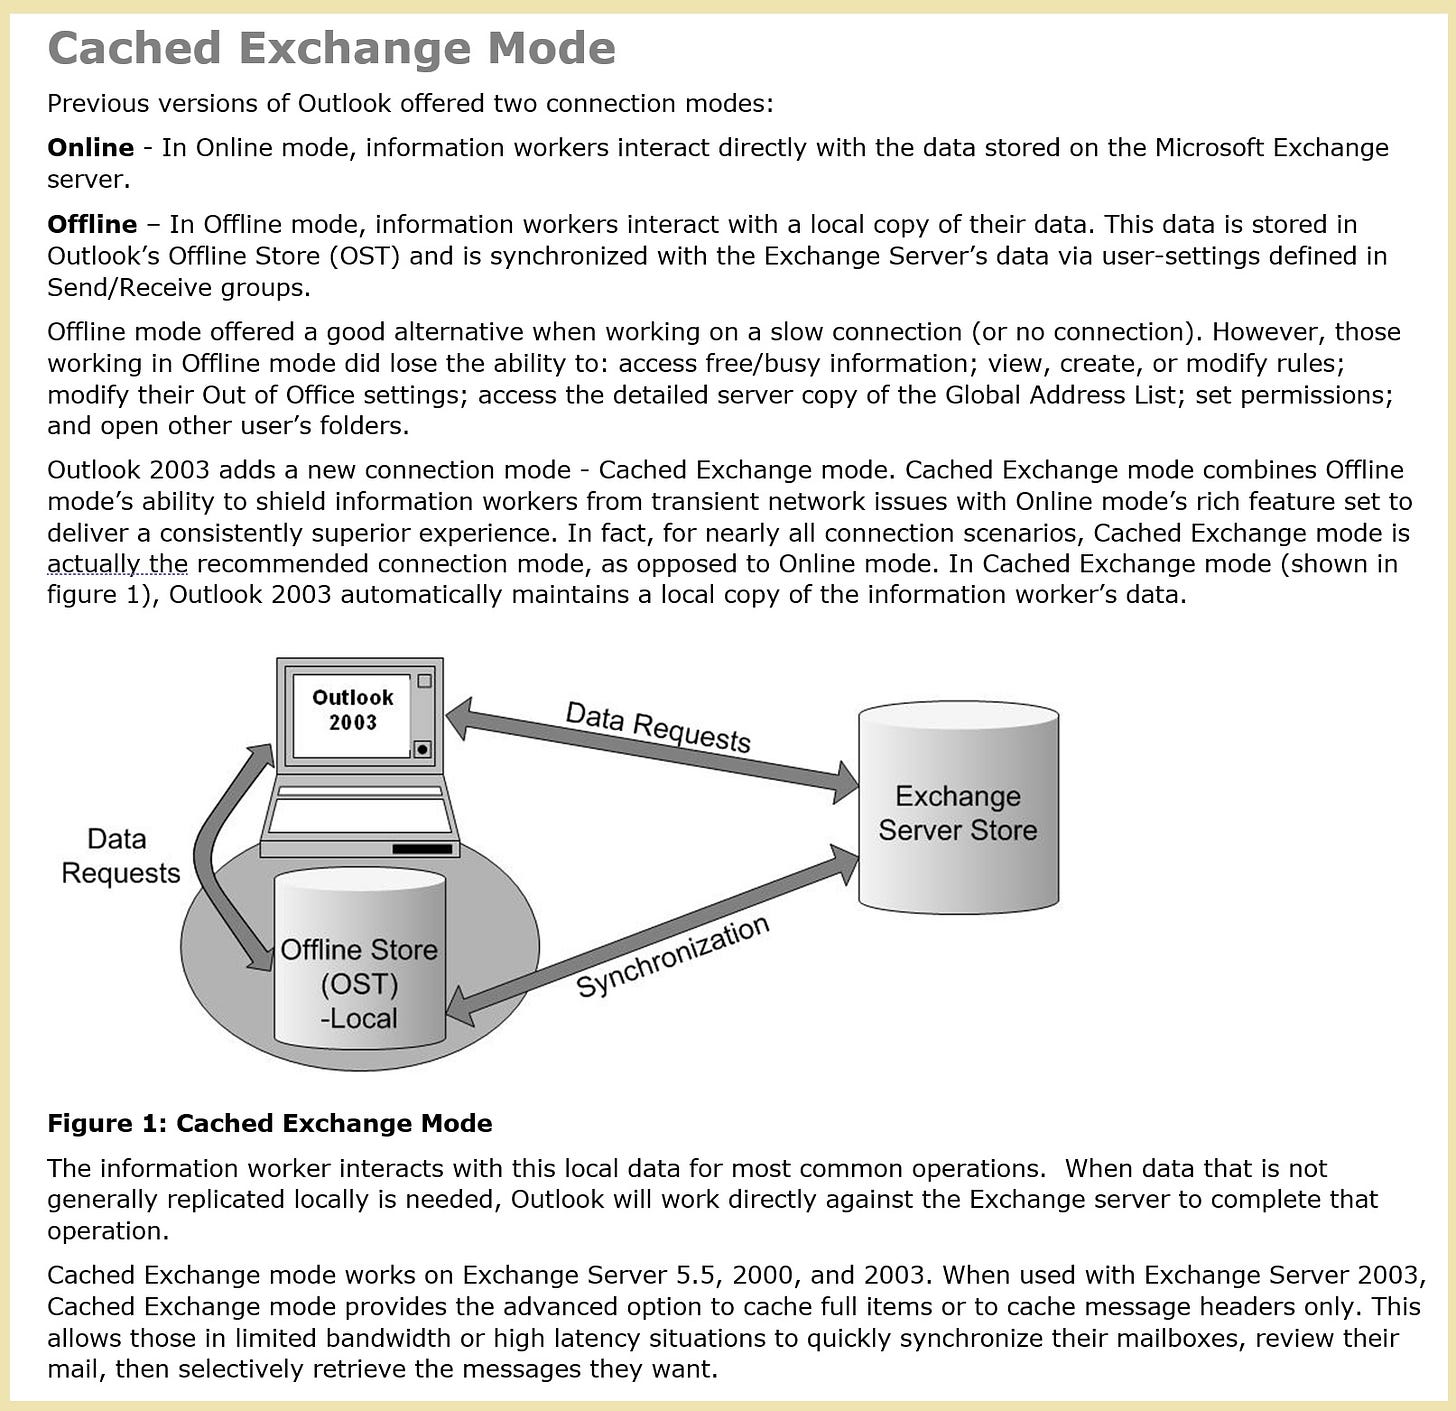 Figure 1: Cached Exchange mode  The information worker actually interacts with this local data for most common  operations. In this way, loss of connectivity does not have as much negative impact  on the client experience. When data that is not generally replicated locally is needed,  Outlook 2003 will work directly against the Exchange server to complete that  operation.